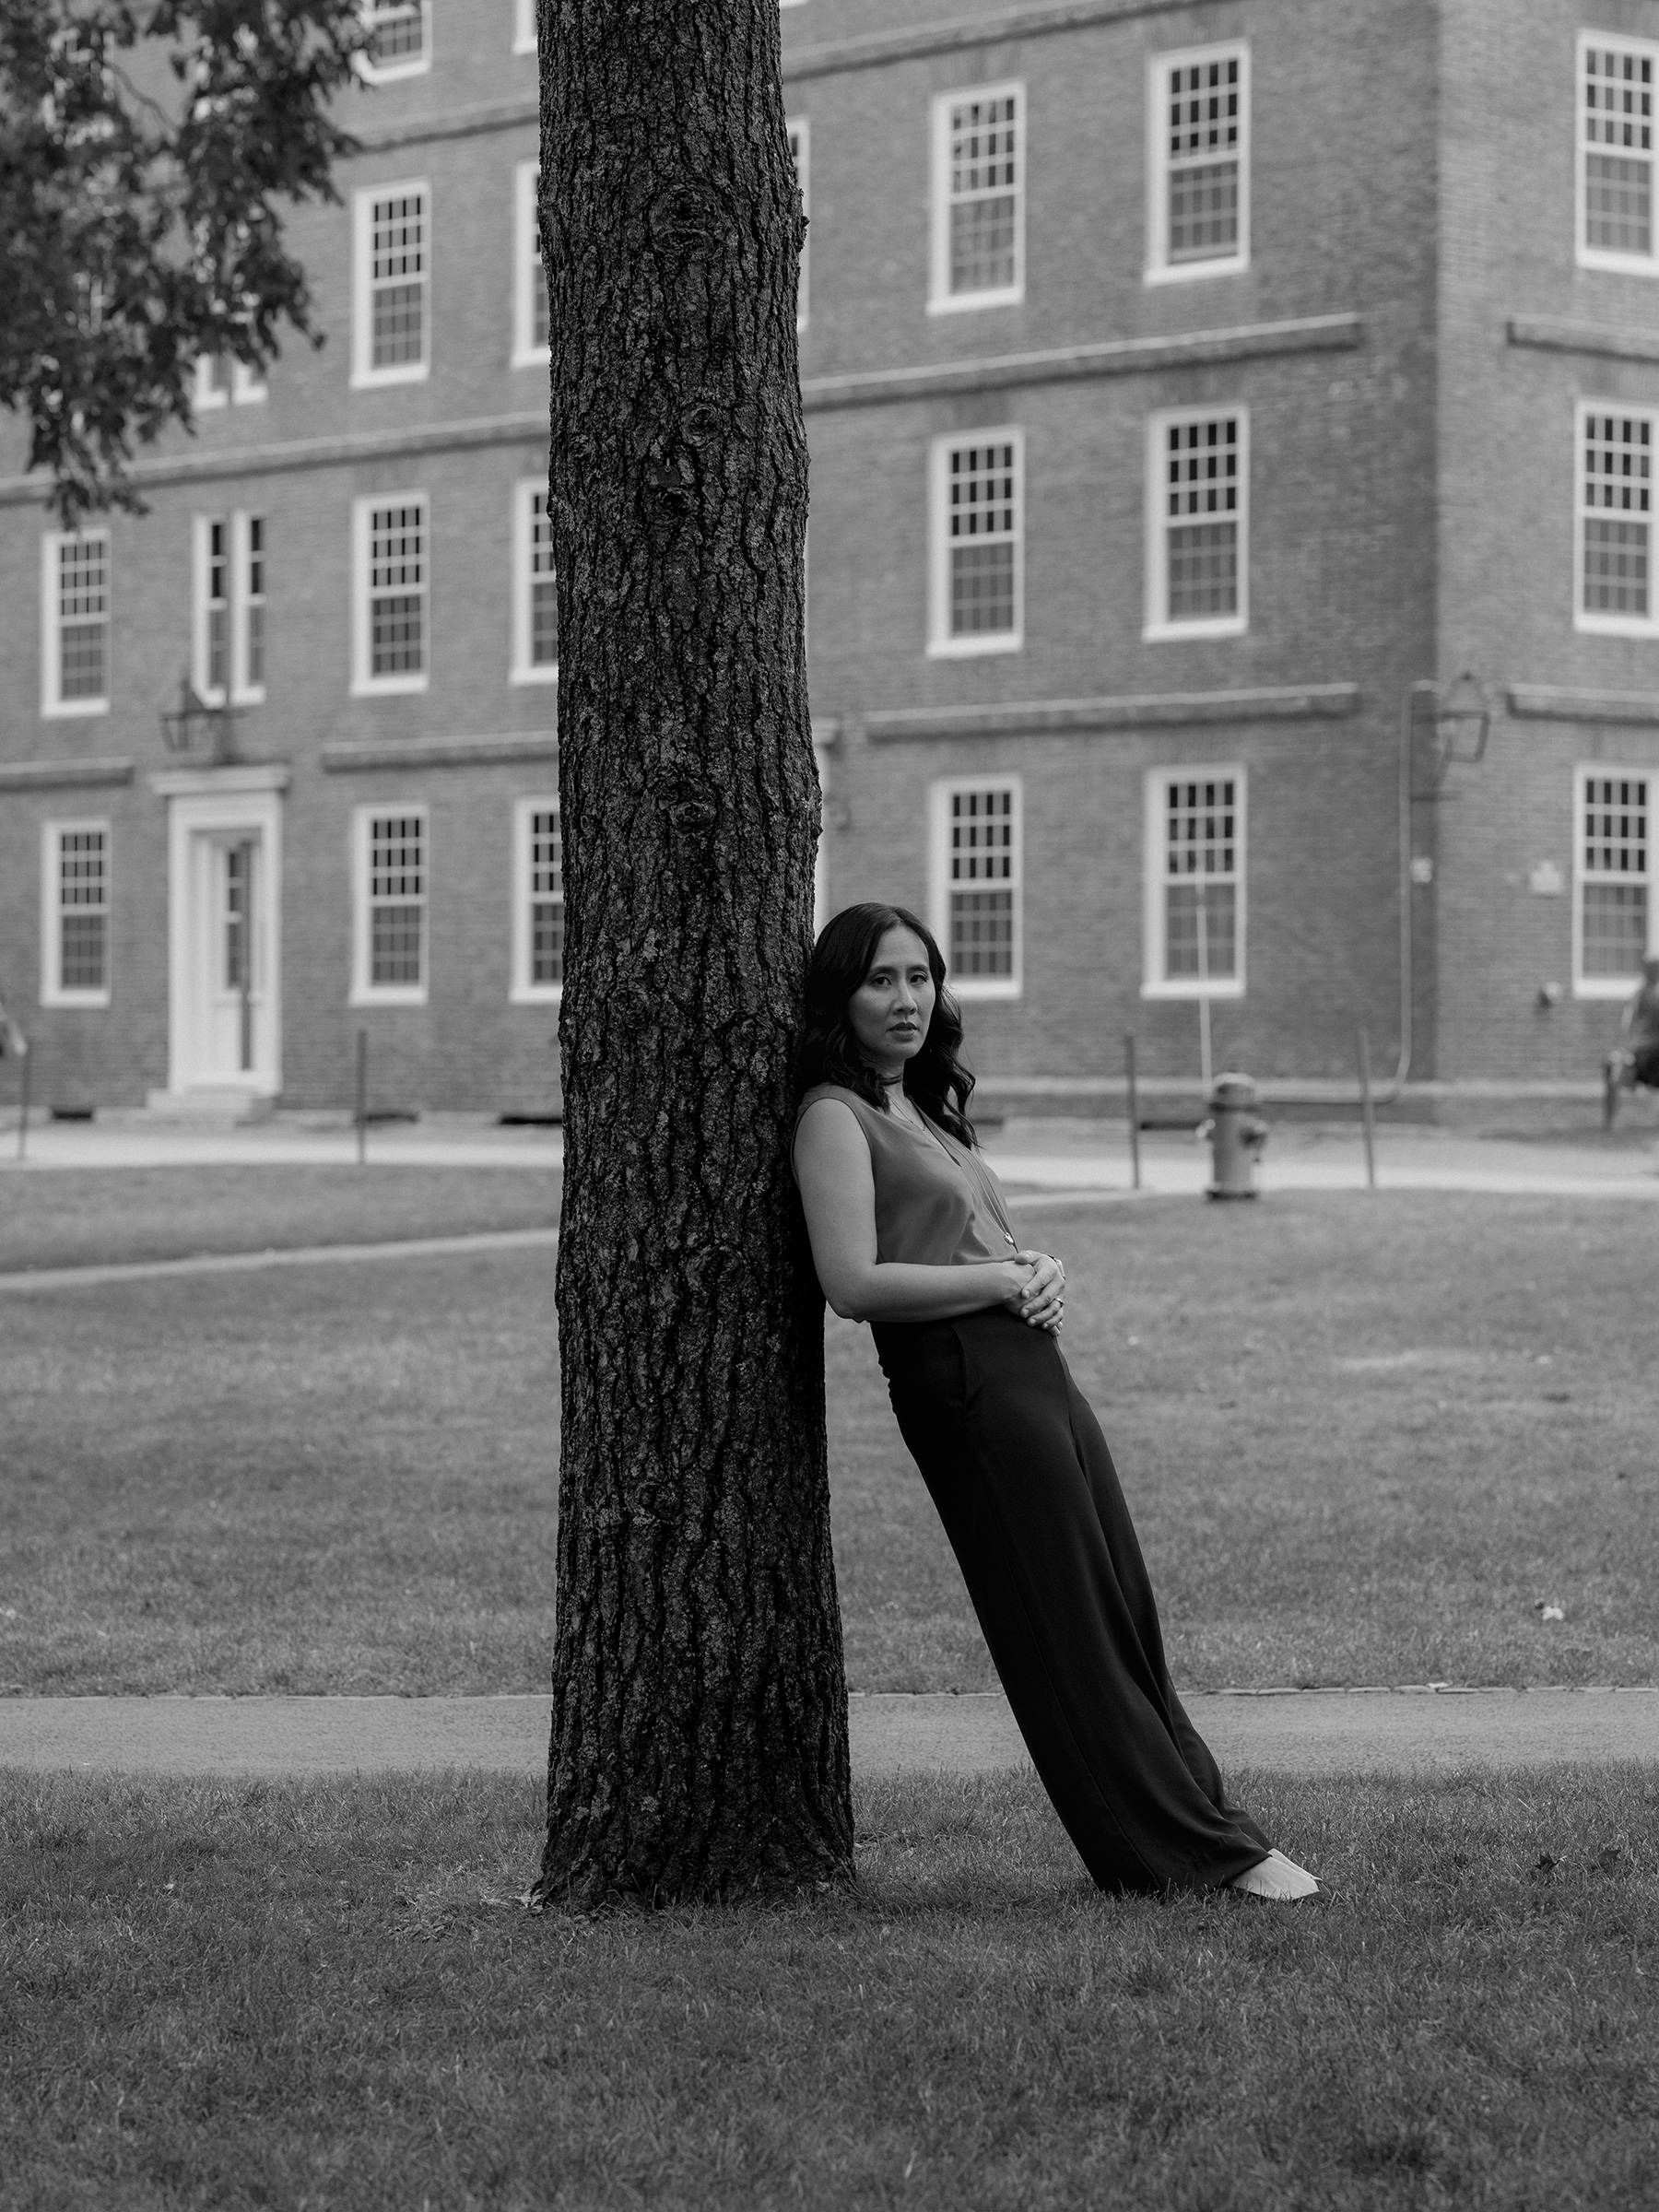 Author Celeste Ng on Harvard's campus in Cambridge, Mass. (Allie Leepson + Jesse McClary for TIME)